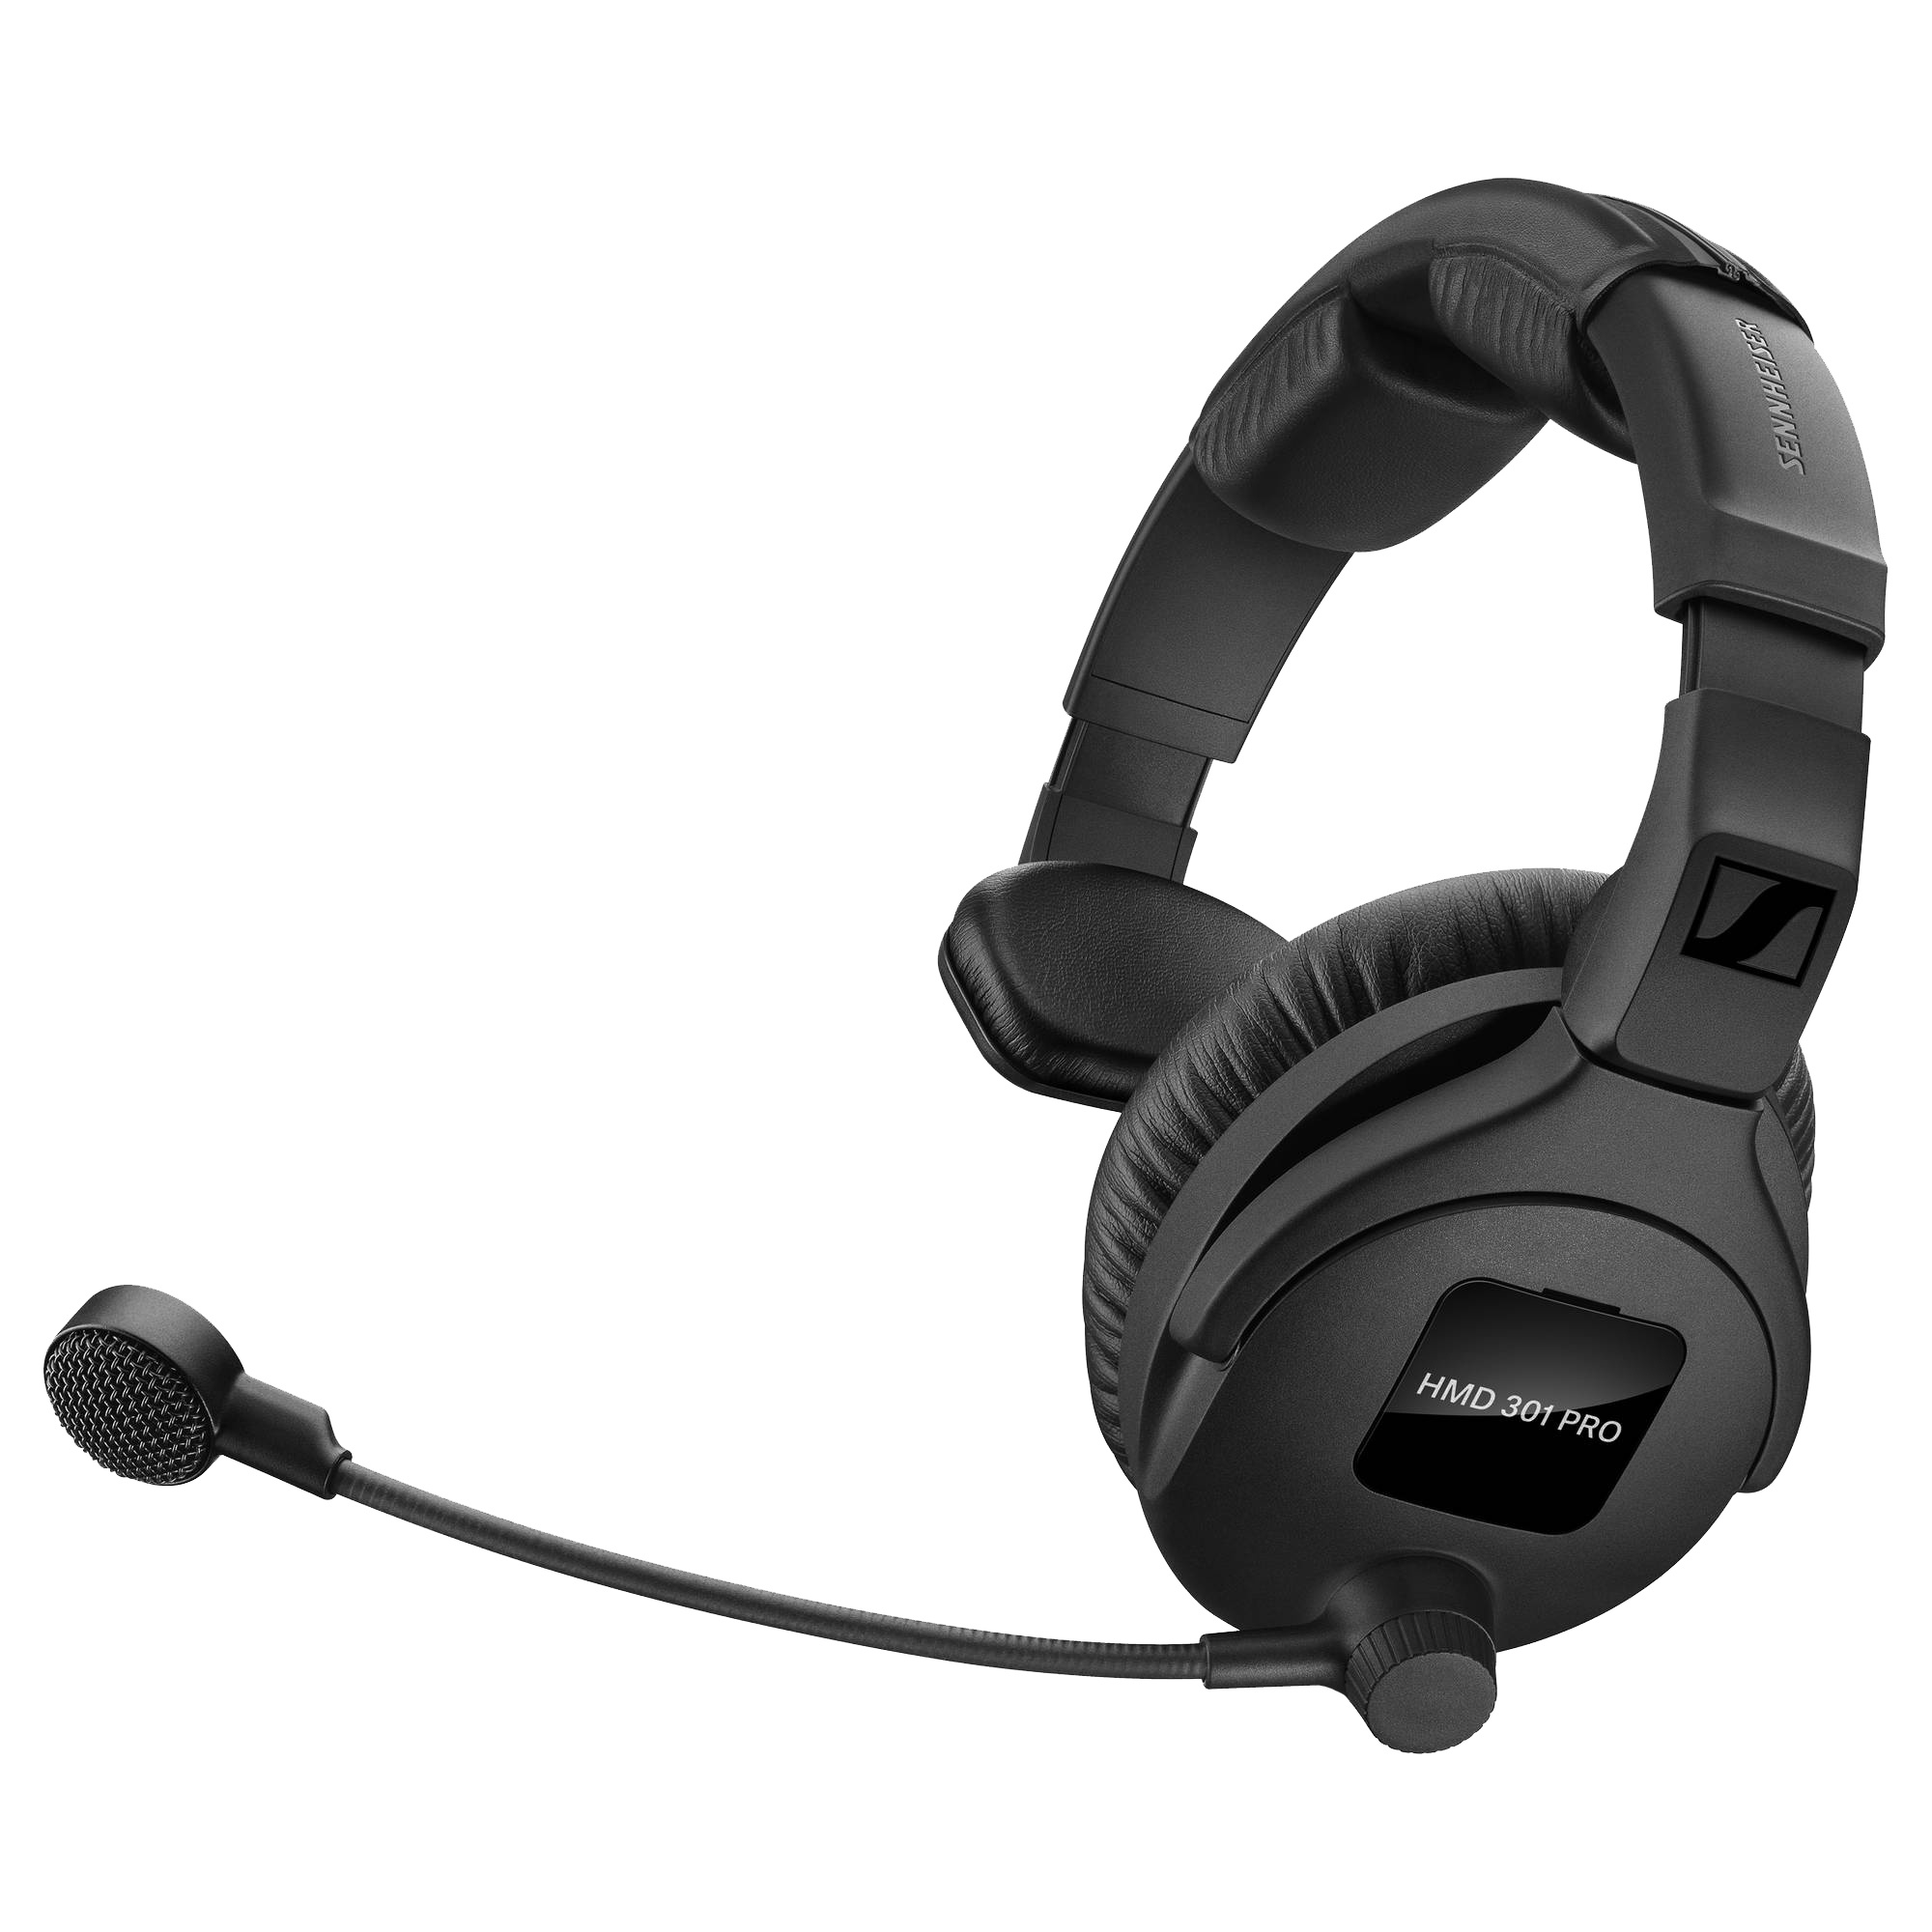 Sennheiser HMD 301 Pro Broadcast Headset (Without Cable)